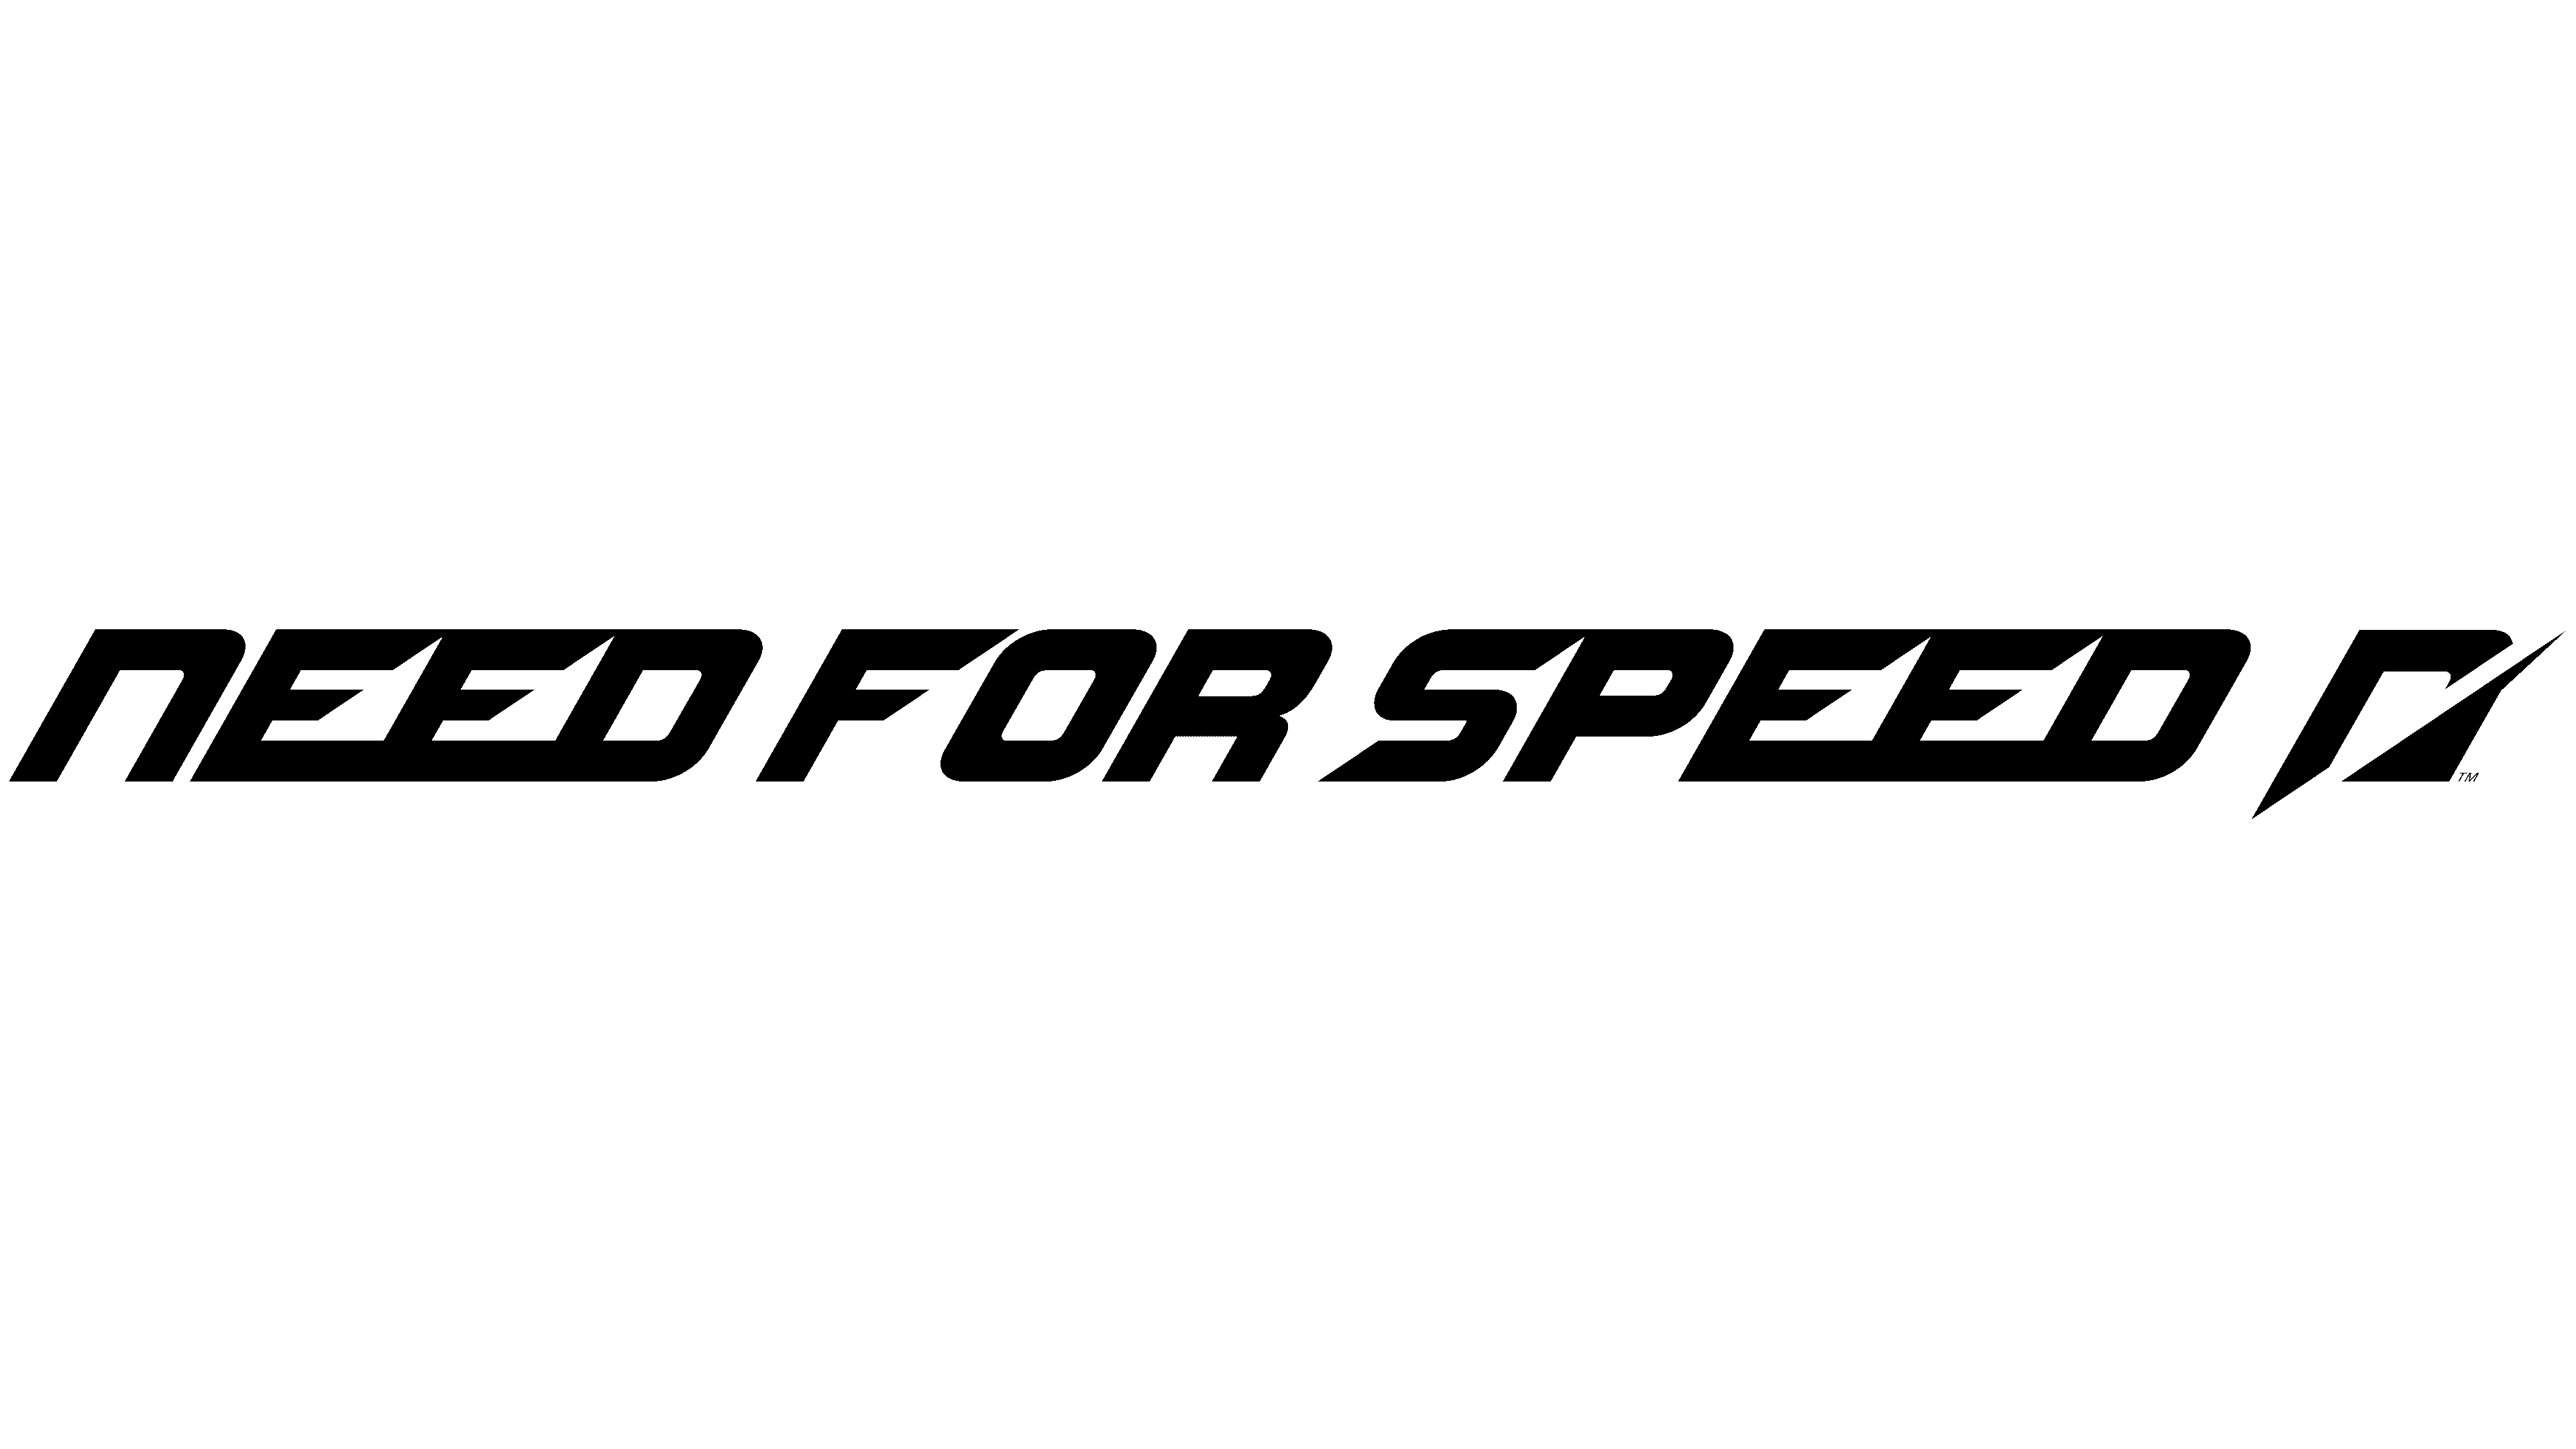 Detail Font Need For Speed Nomer 52